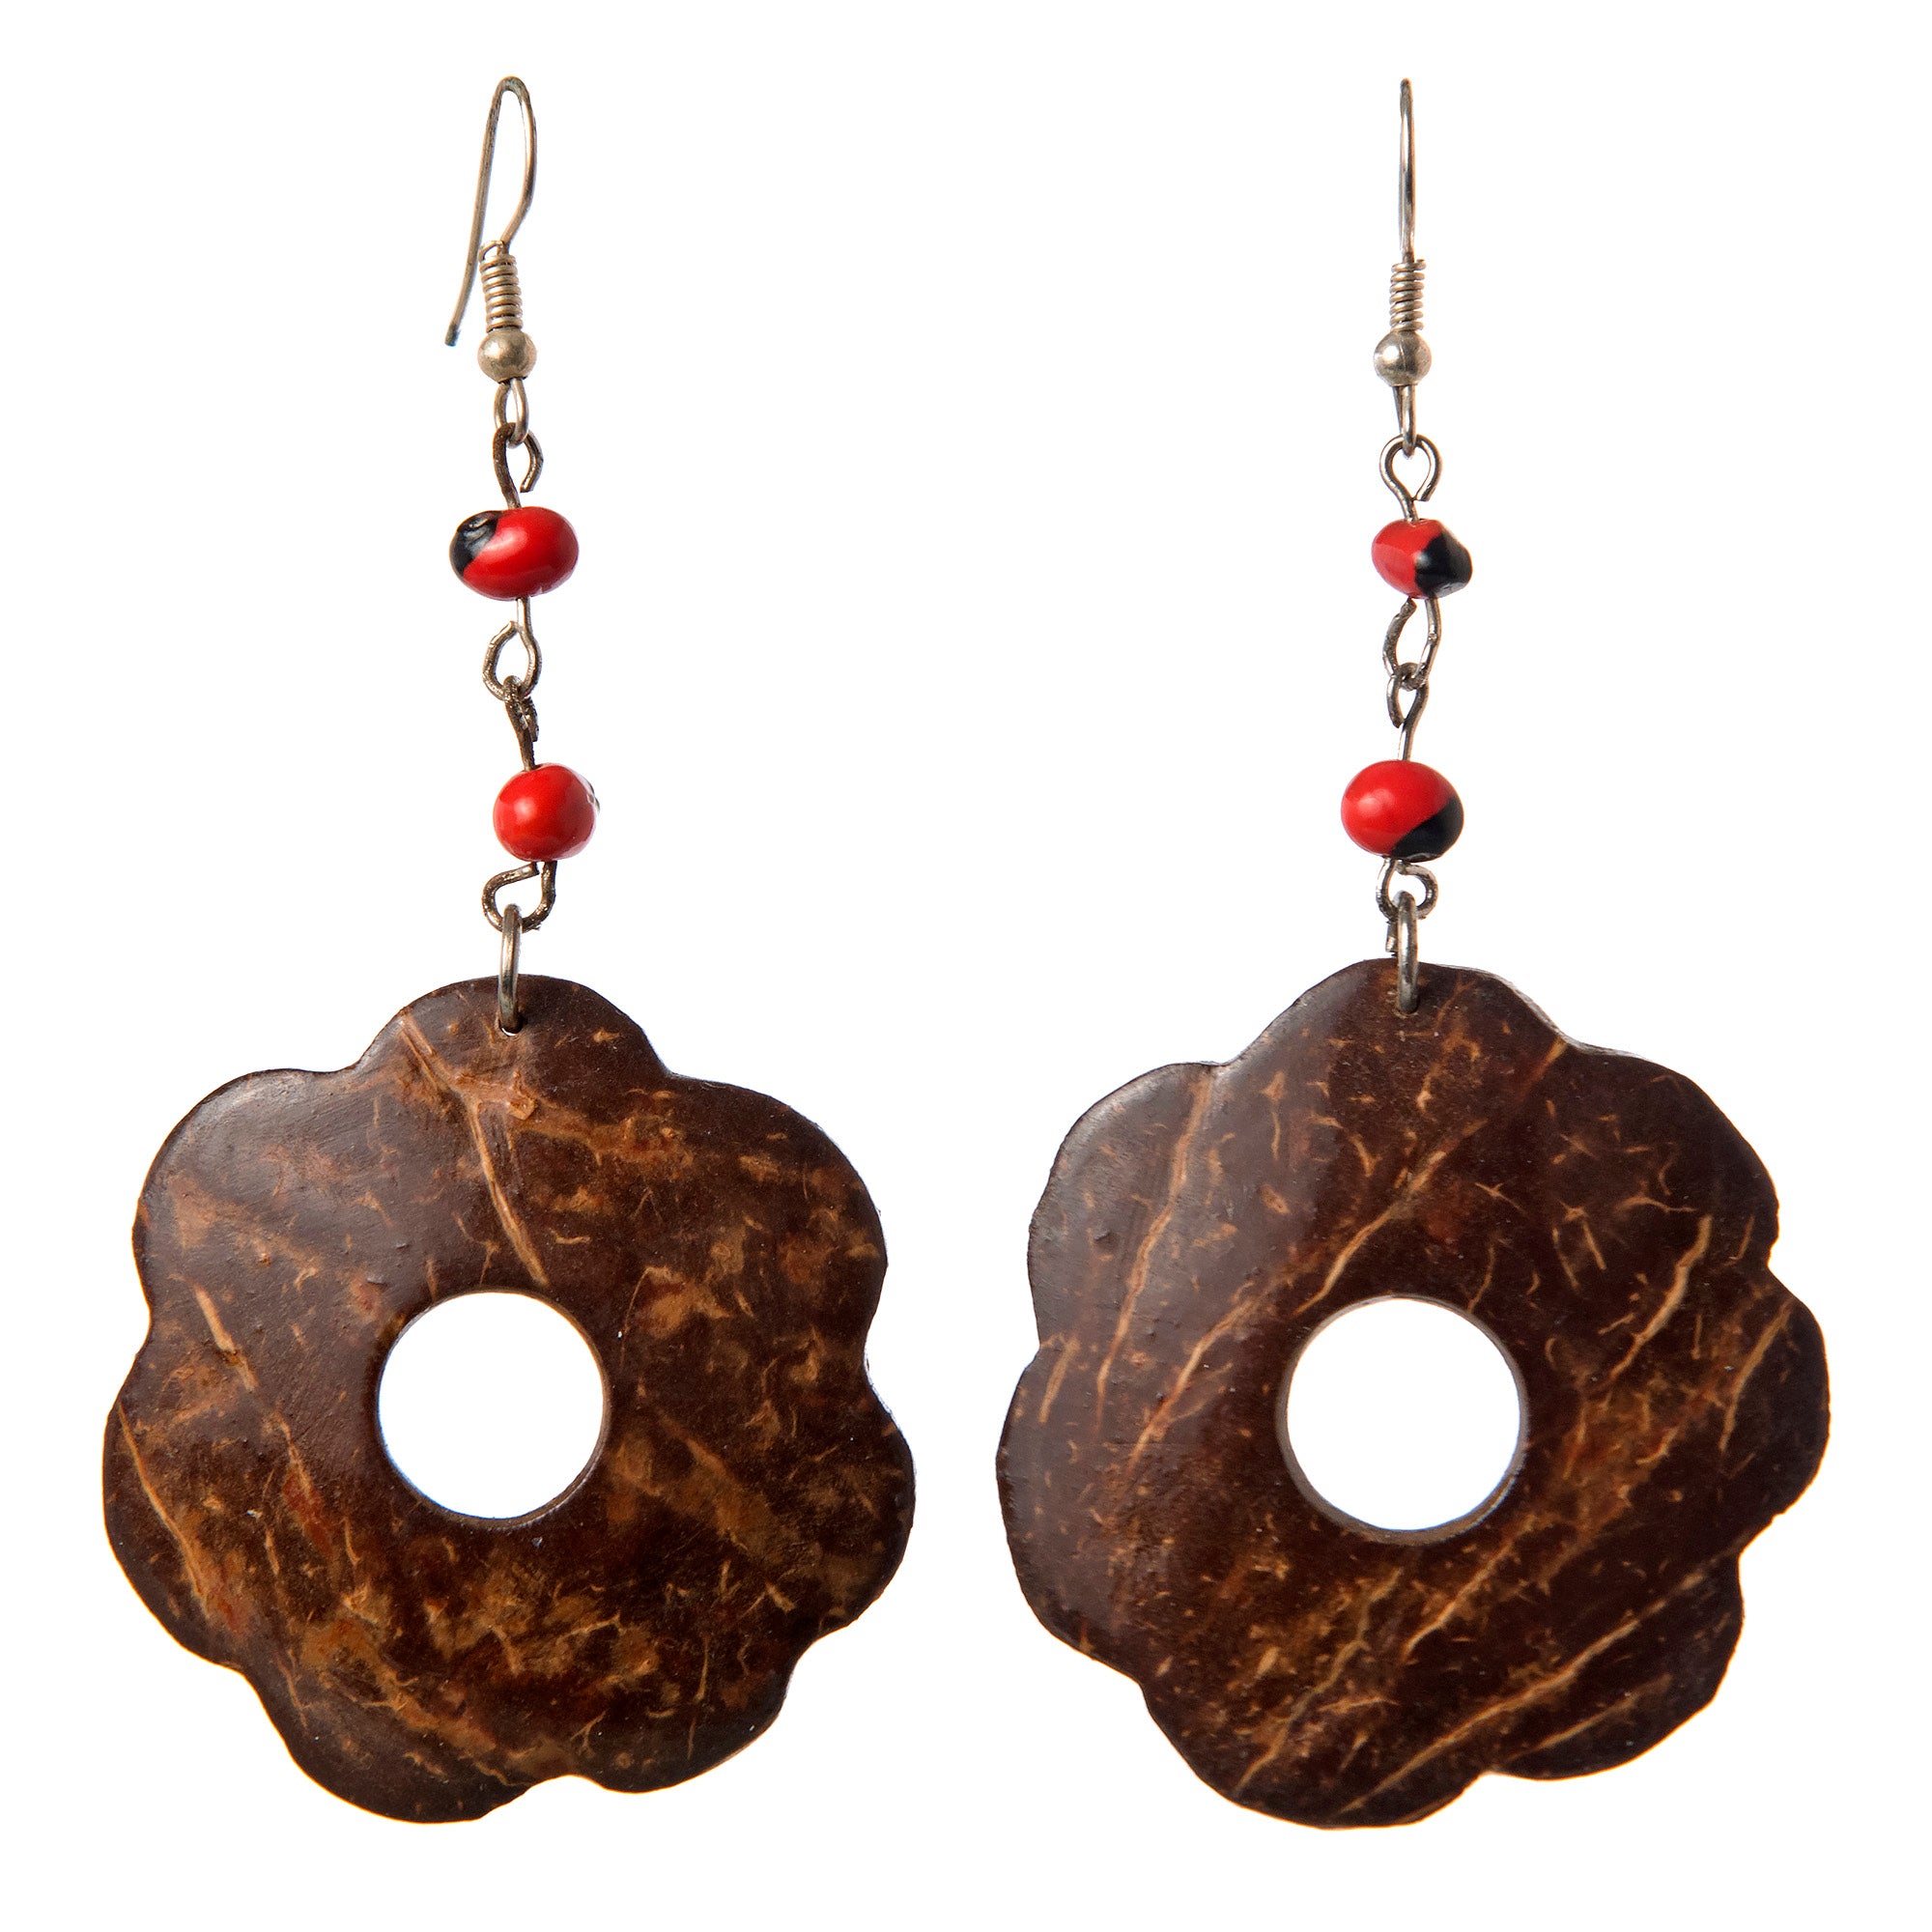 Discover more than 225 coconut shell earrings